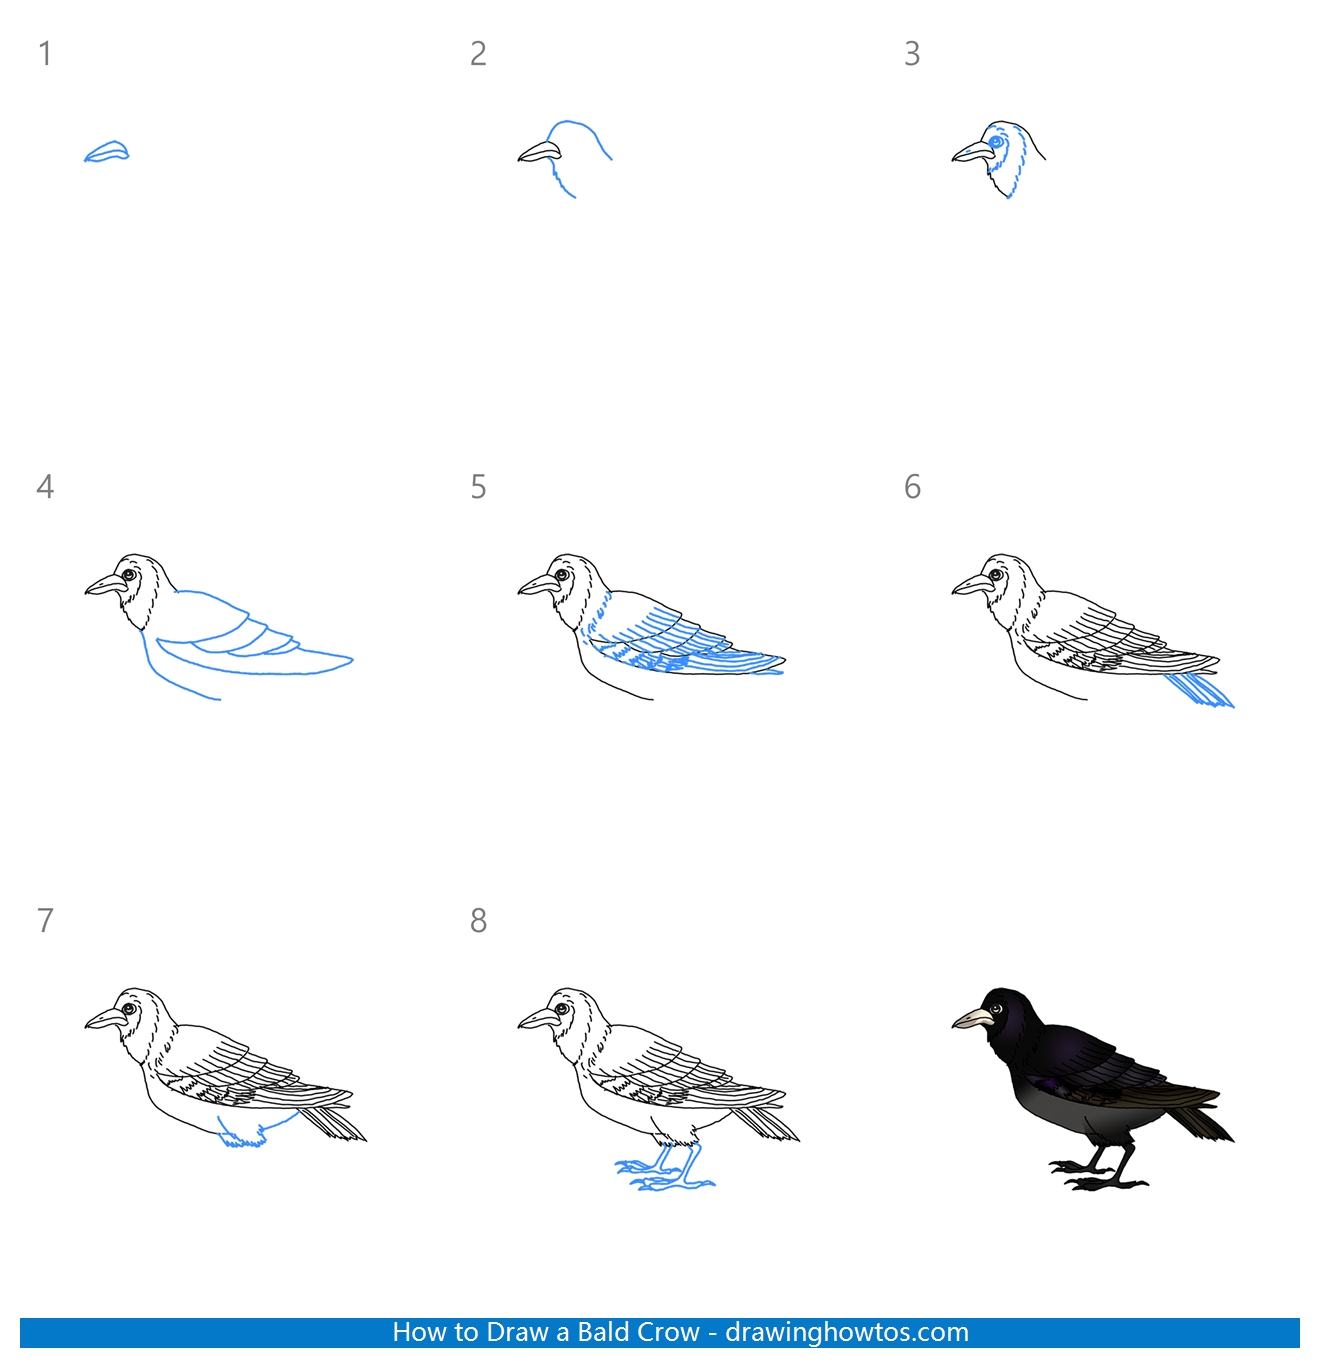 How to Draw a Bald Crow Step by Step